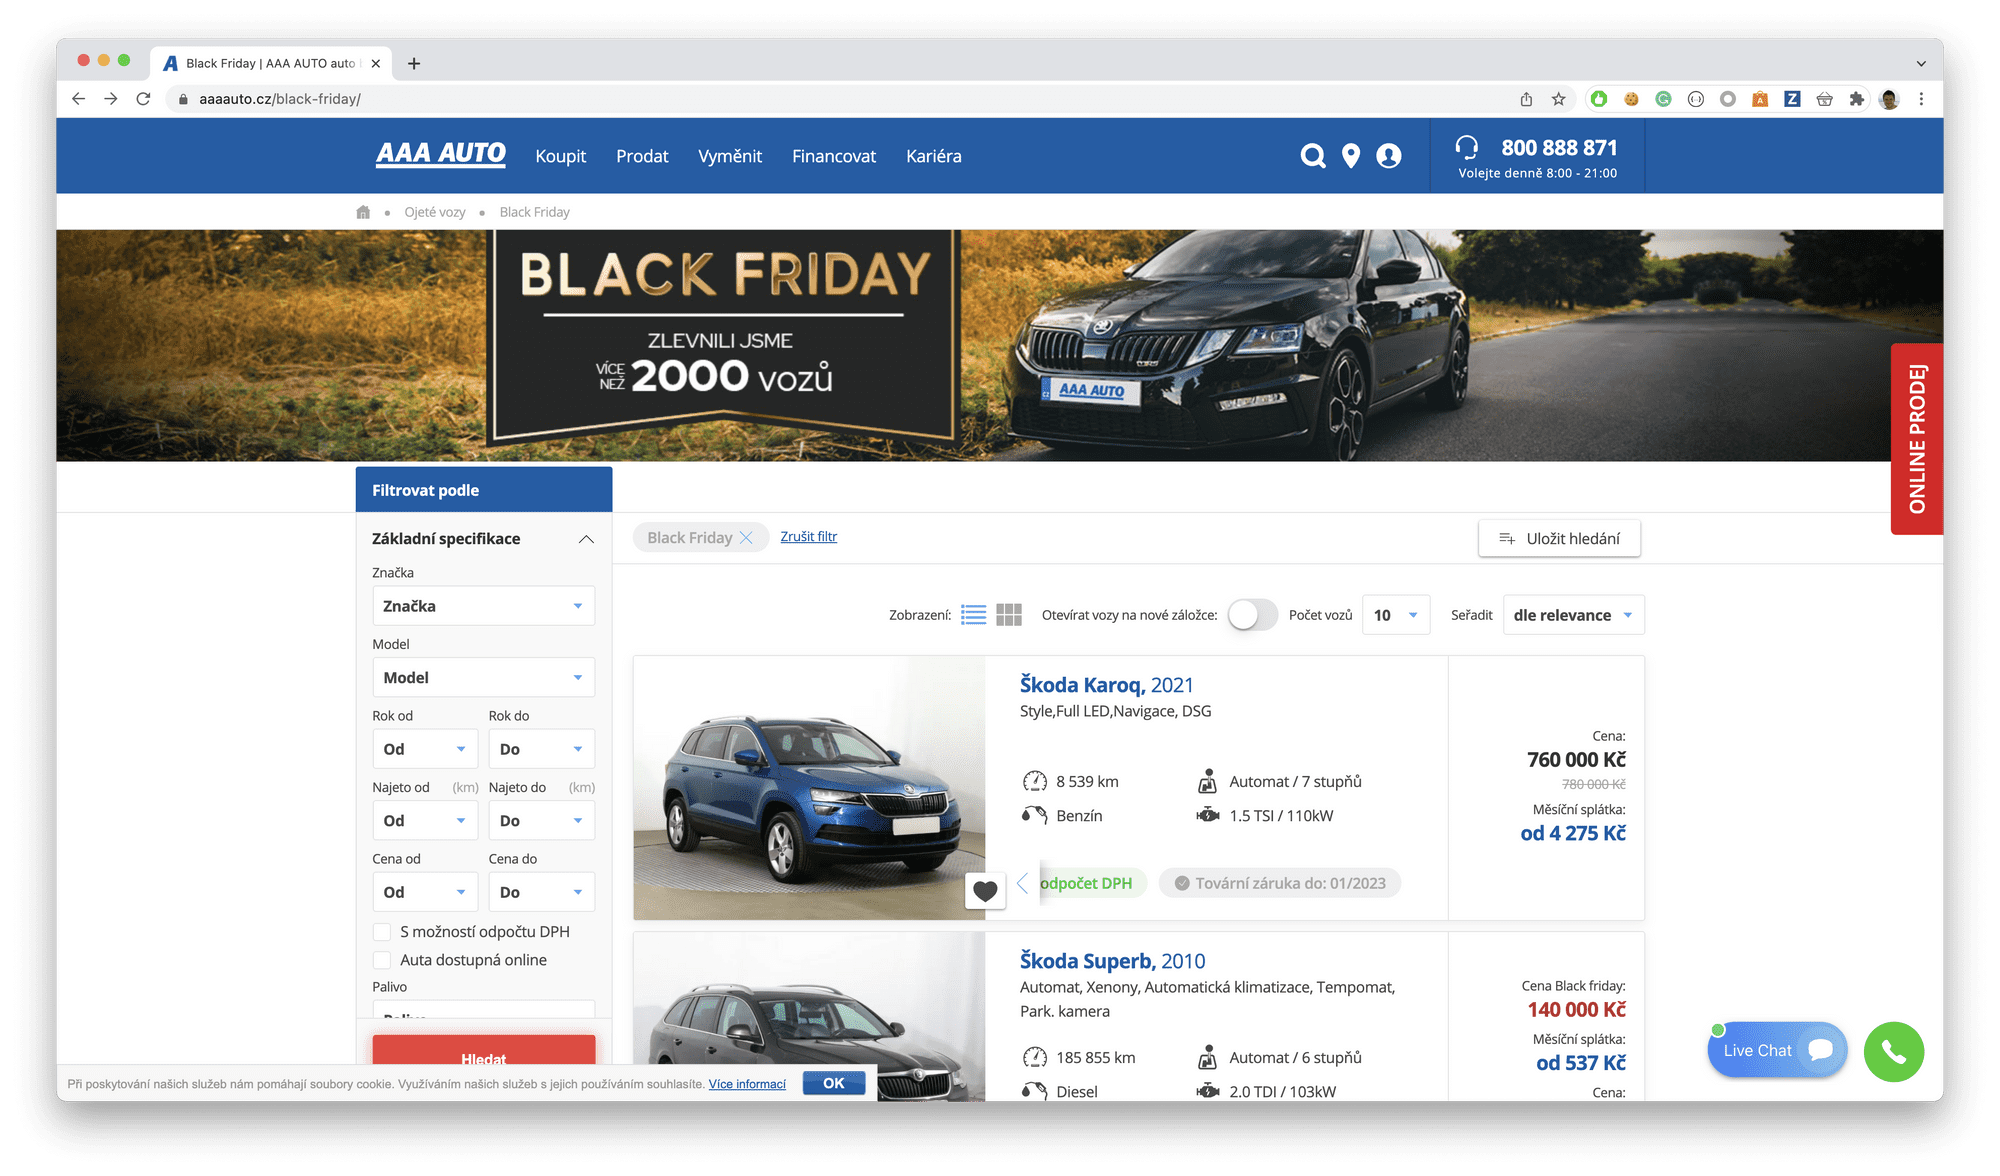 screenshot of a car on sale at aaaauto.cz from 780,000 CZK to 760,000 CZK